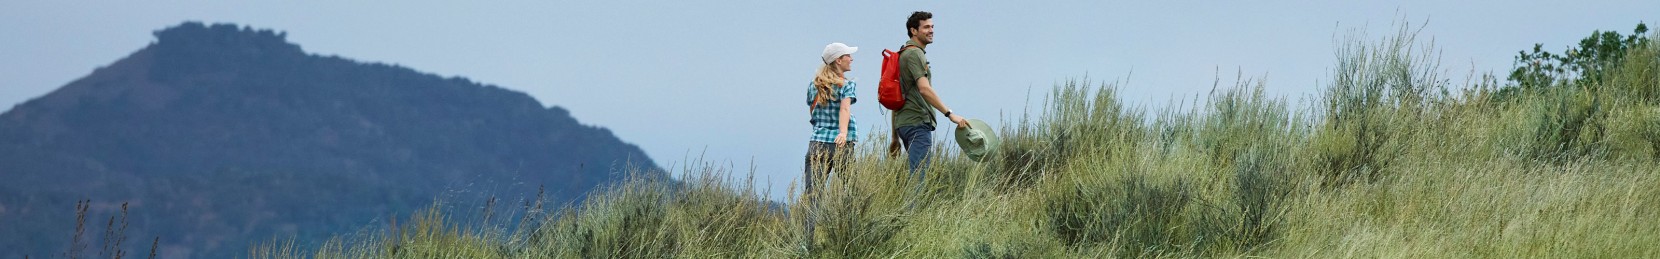 Image of couple hiking in a grassy field with a mountain in the background.